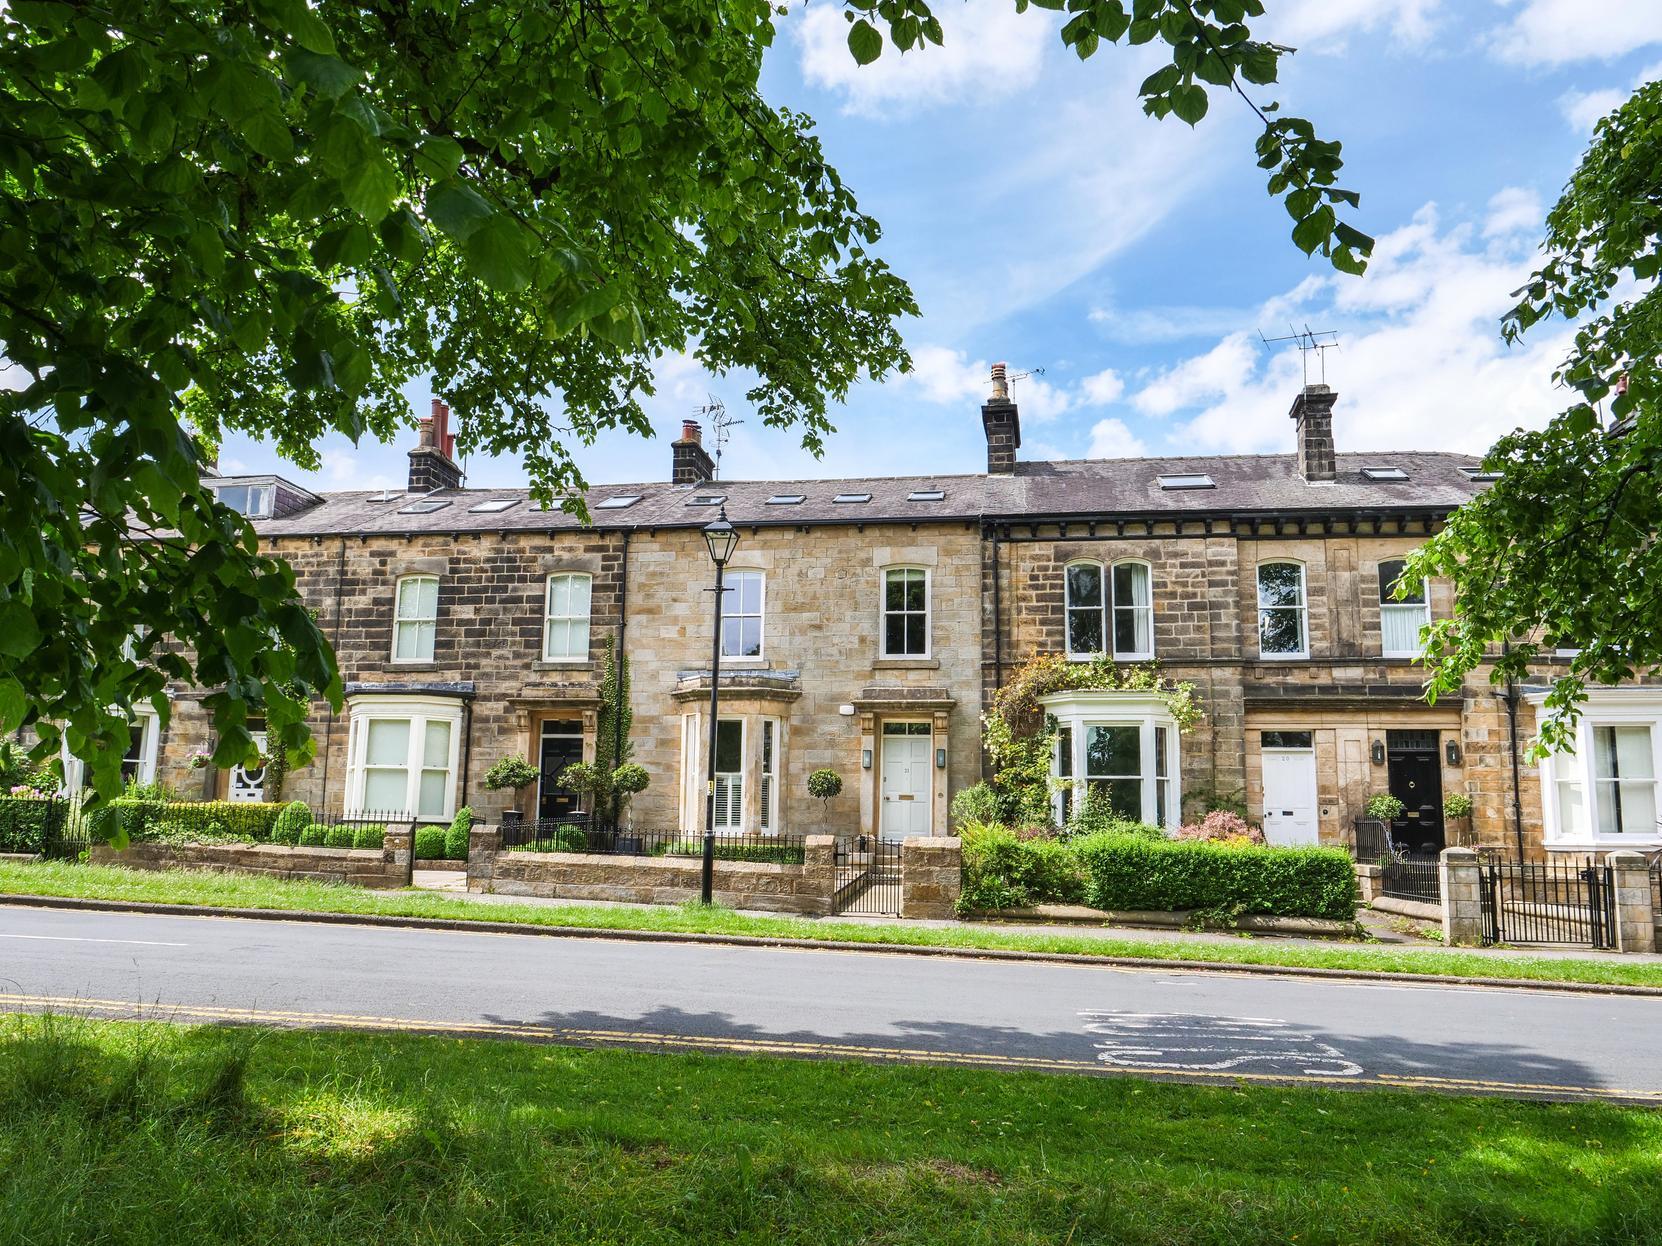 An exceptionally rare opportunity to purchase this substantial, stone built town house which has been extensively improved and modernised and sits in this enviable position overlooking the Beech Grove Stray.